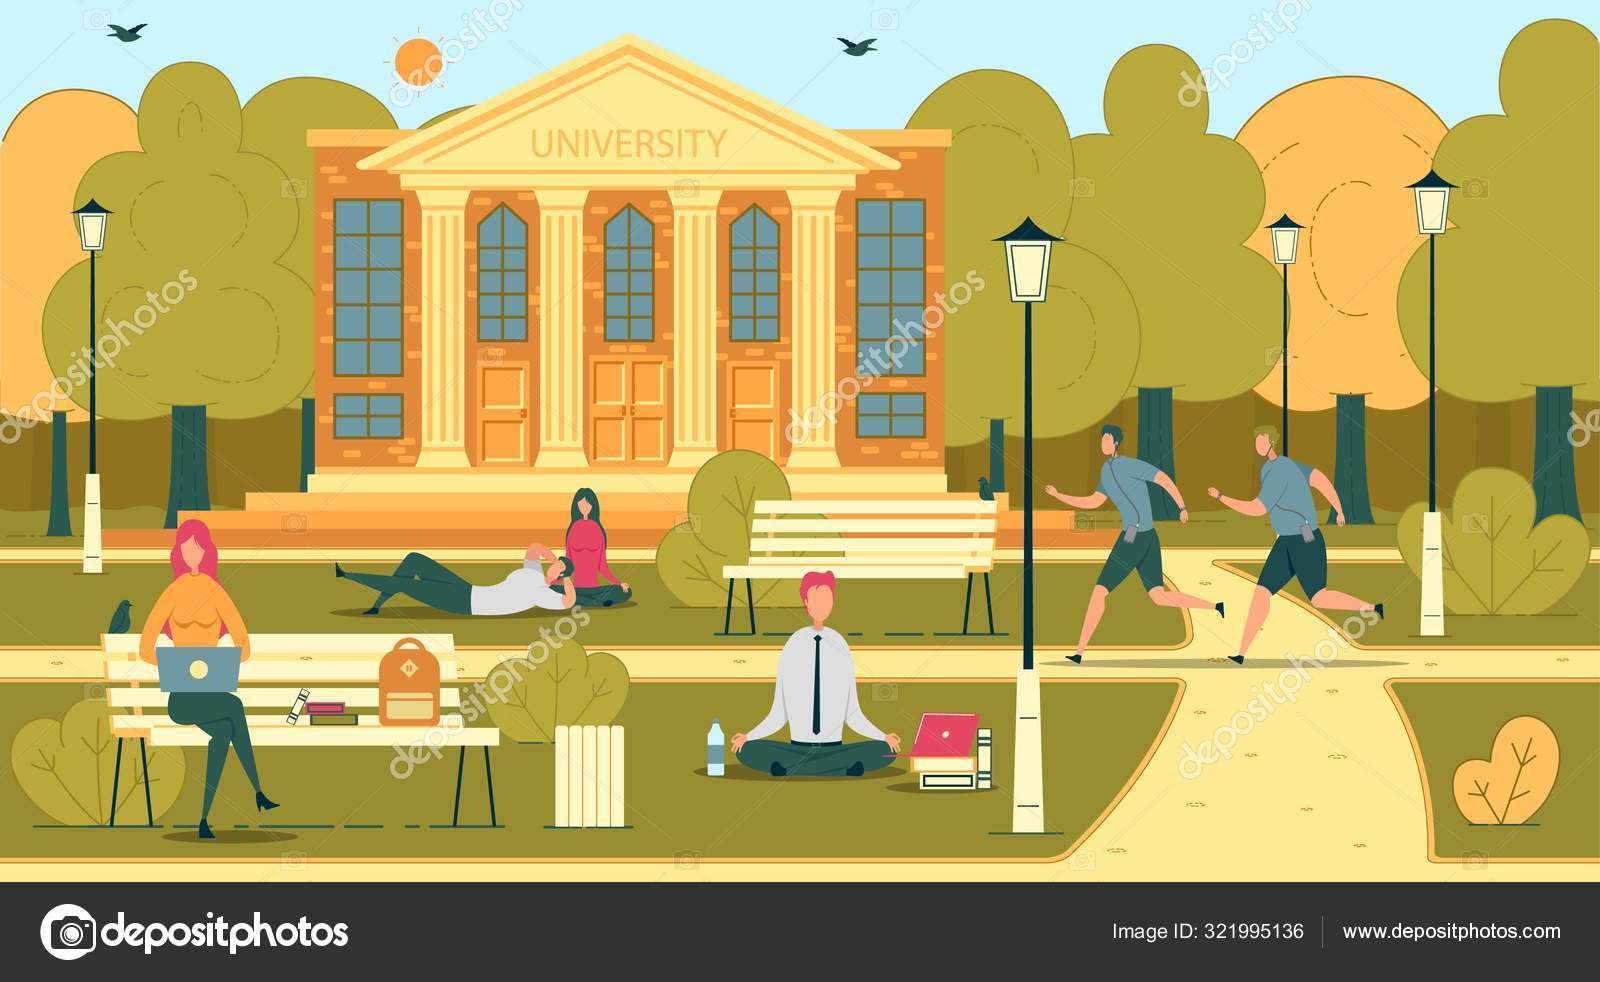 University or College Students in Campus Scene. Stock Vector Image by  ©.com #321995136